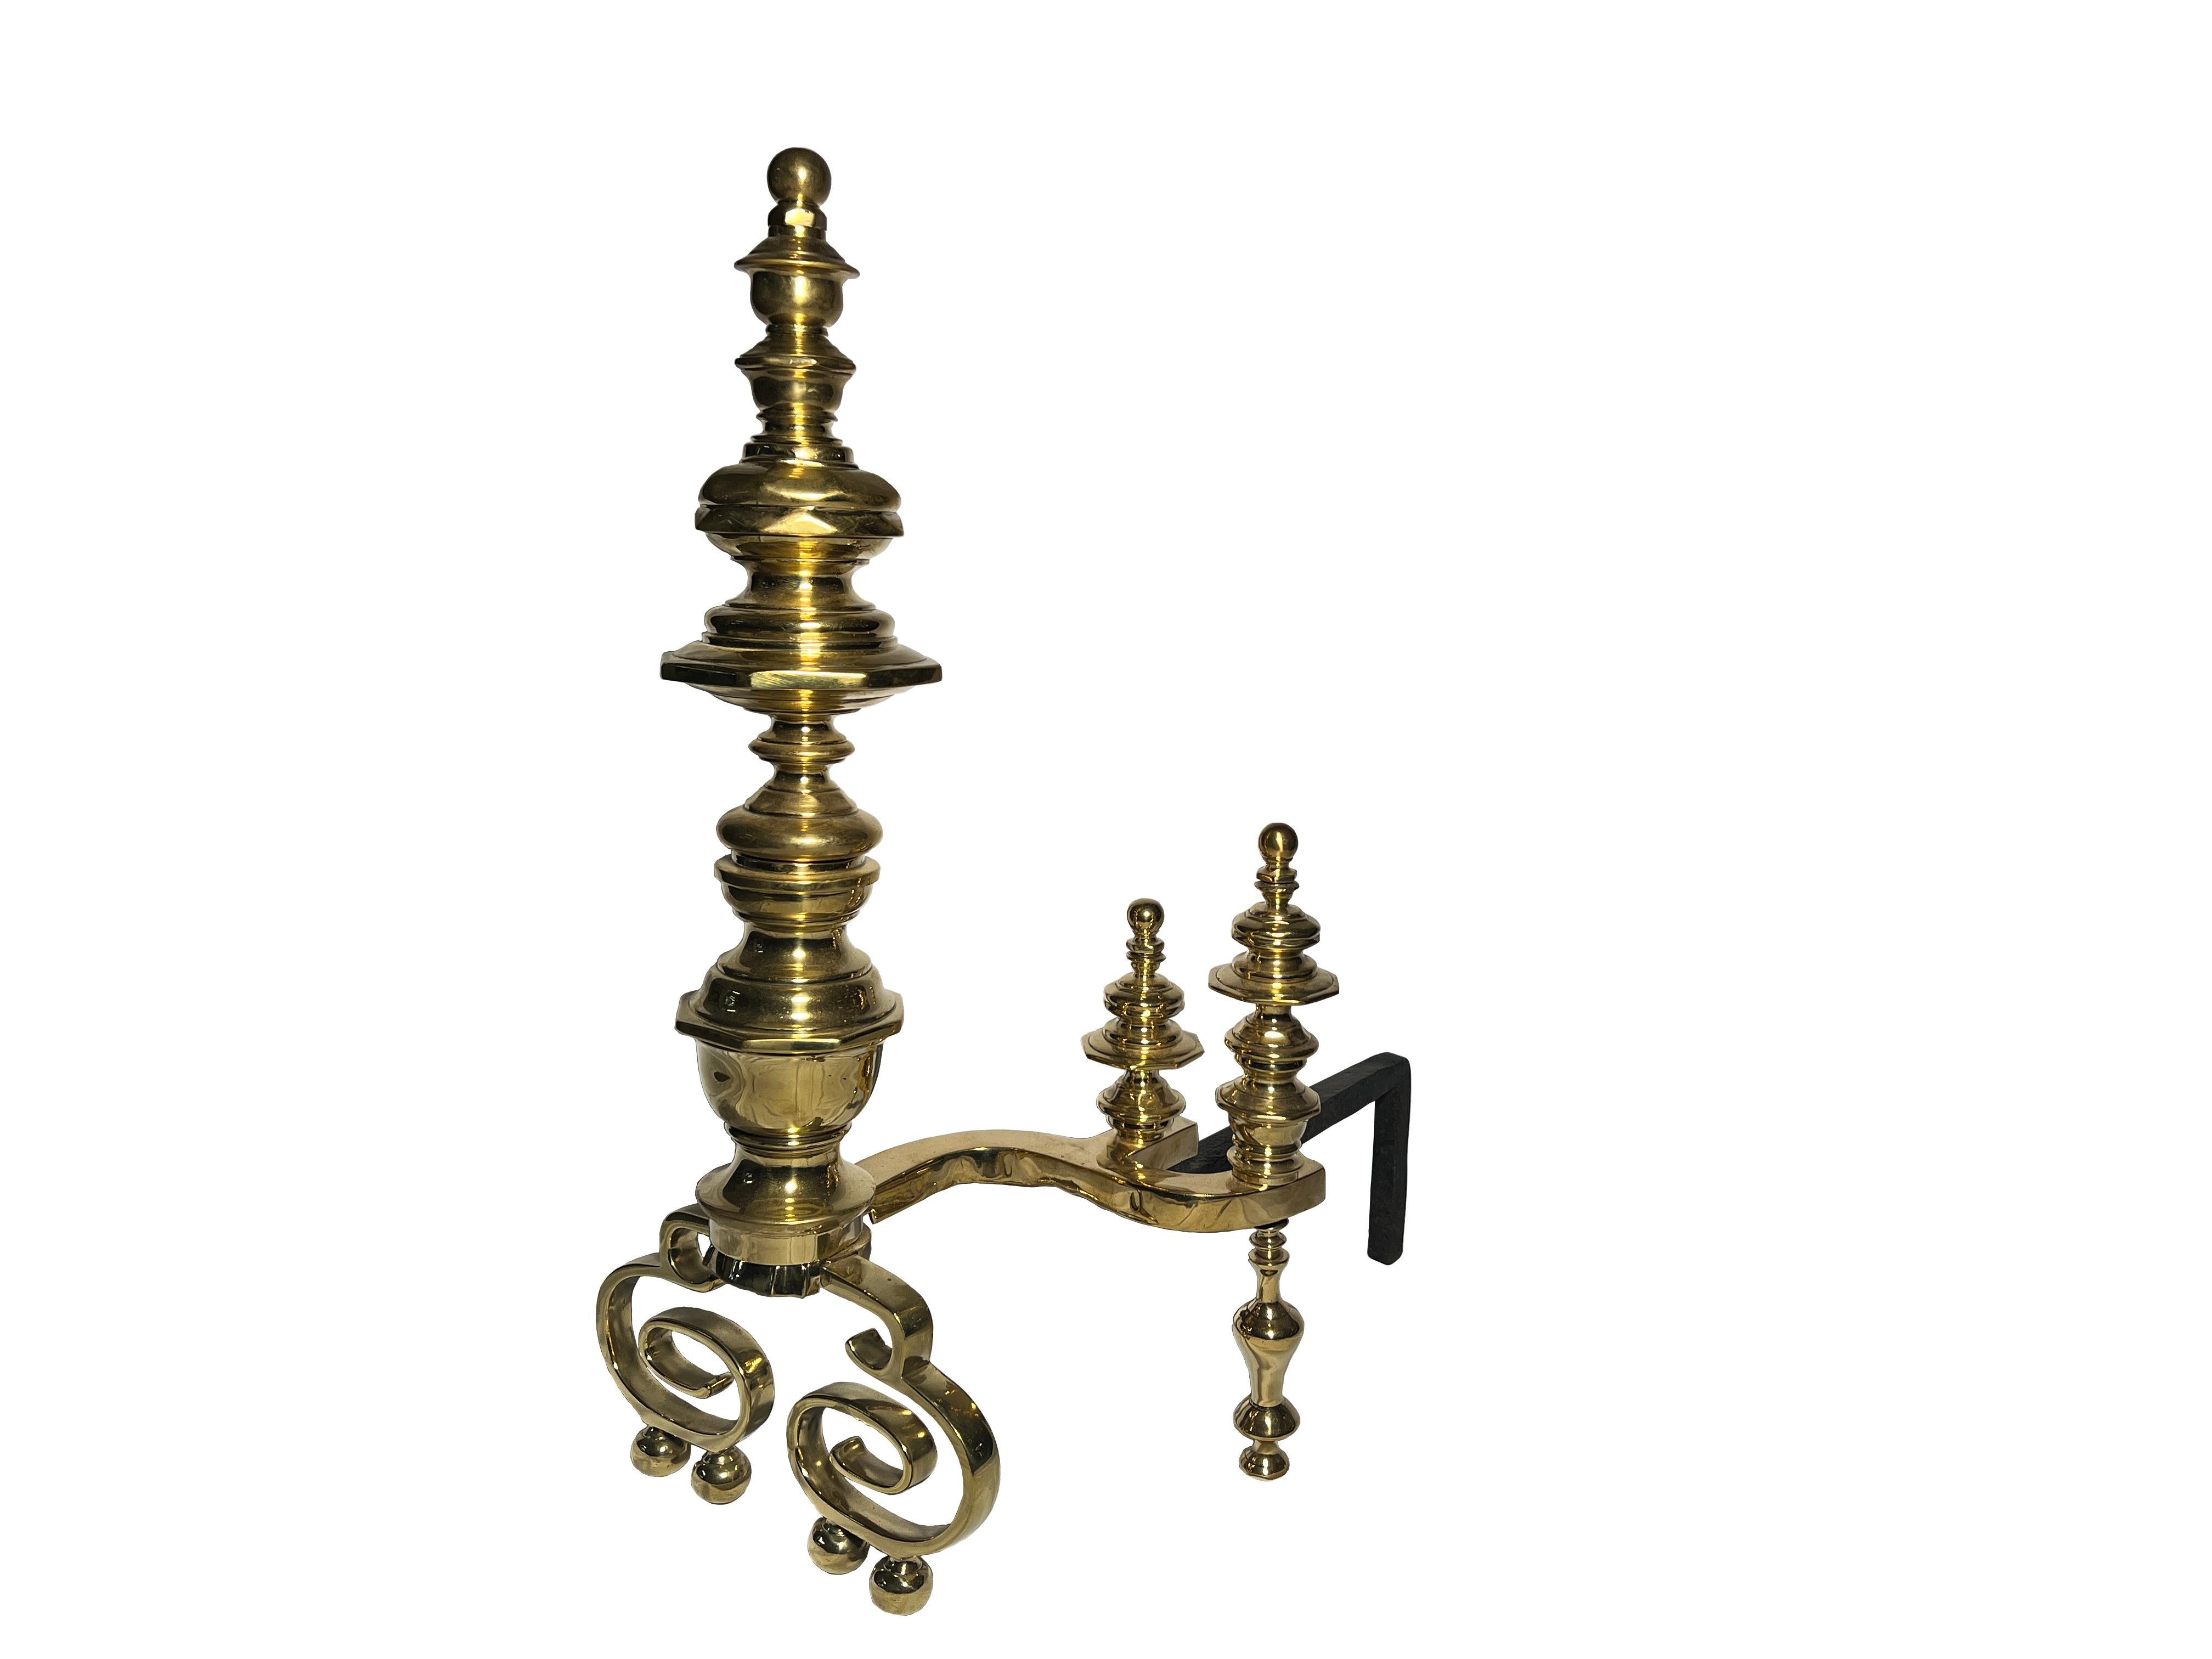 Handsome Pair Antique English Solid Brass Andirons, Circa 1850-1870.